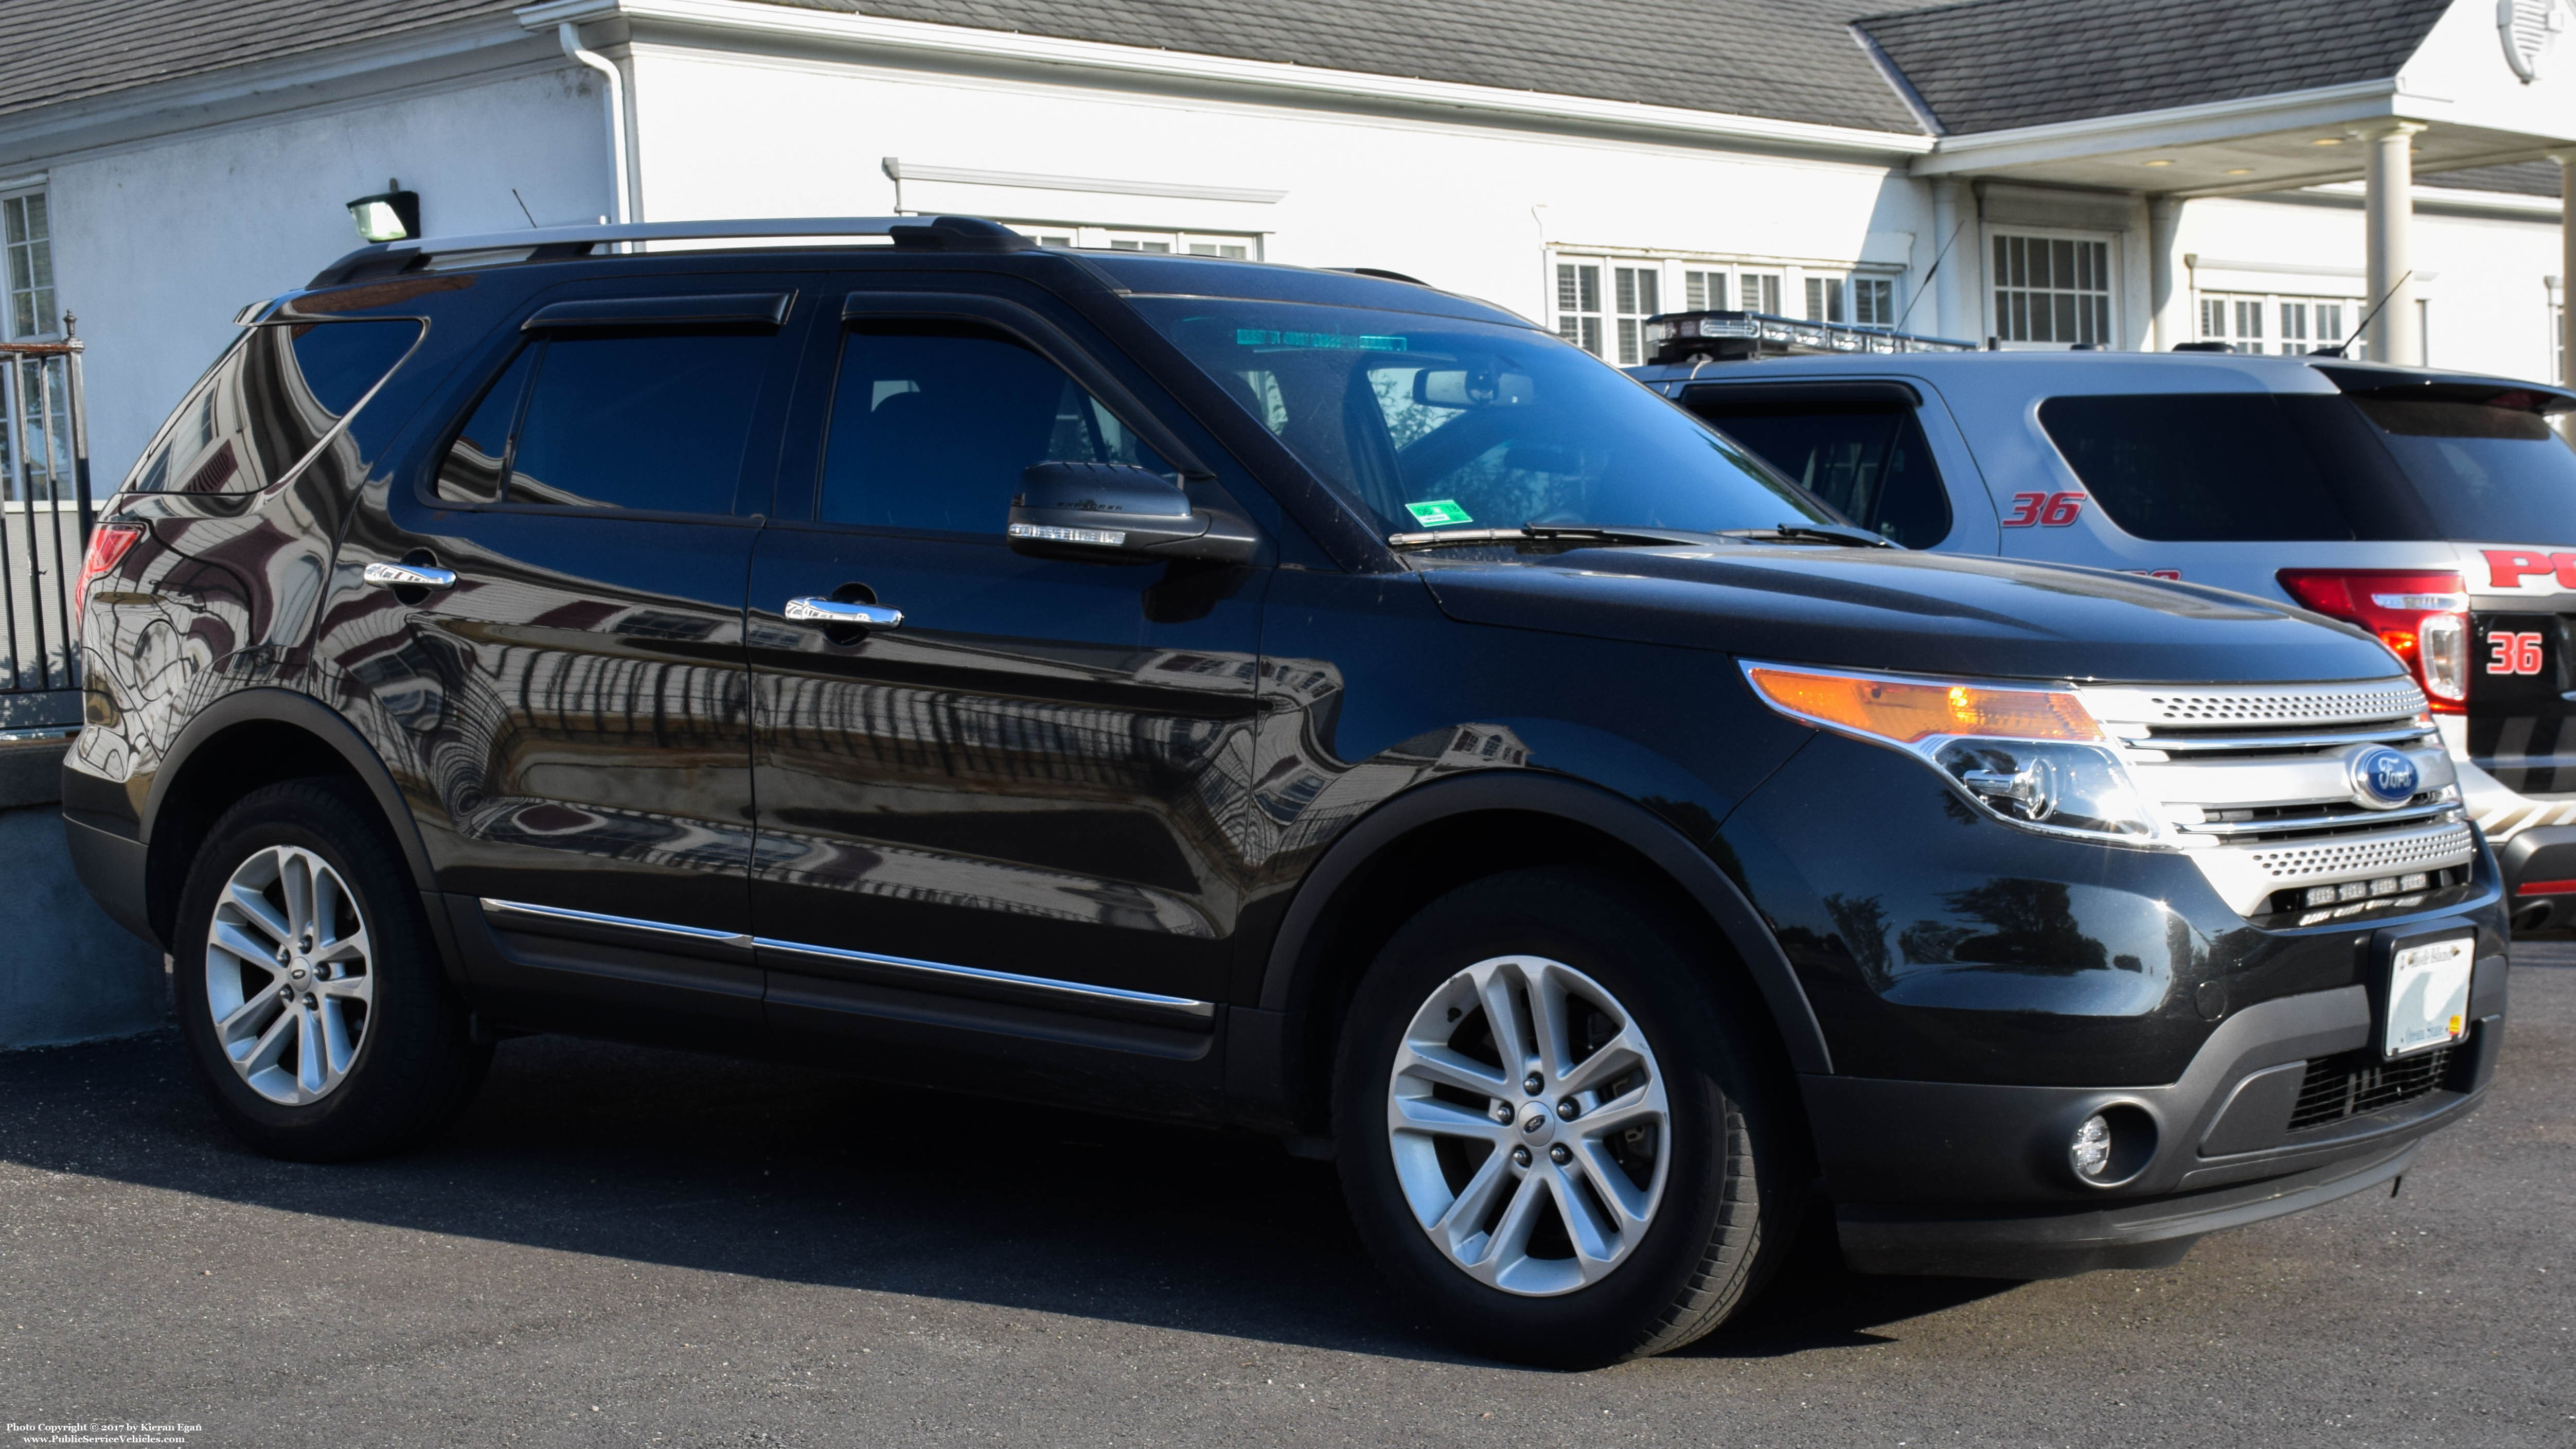 A photo  of East Providence Police
            Unmarked Unit, a 2011-2015 Ford Explorer             taken by Kieran Egan